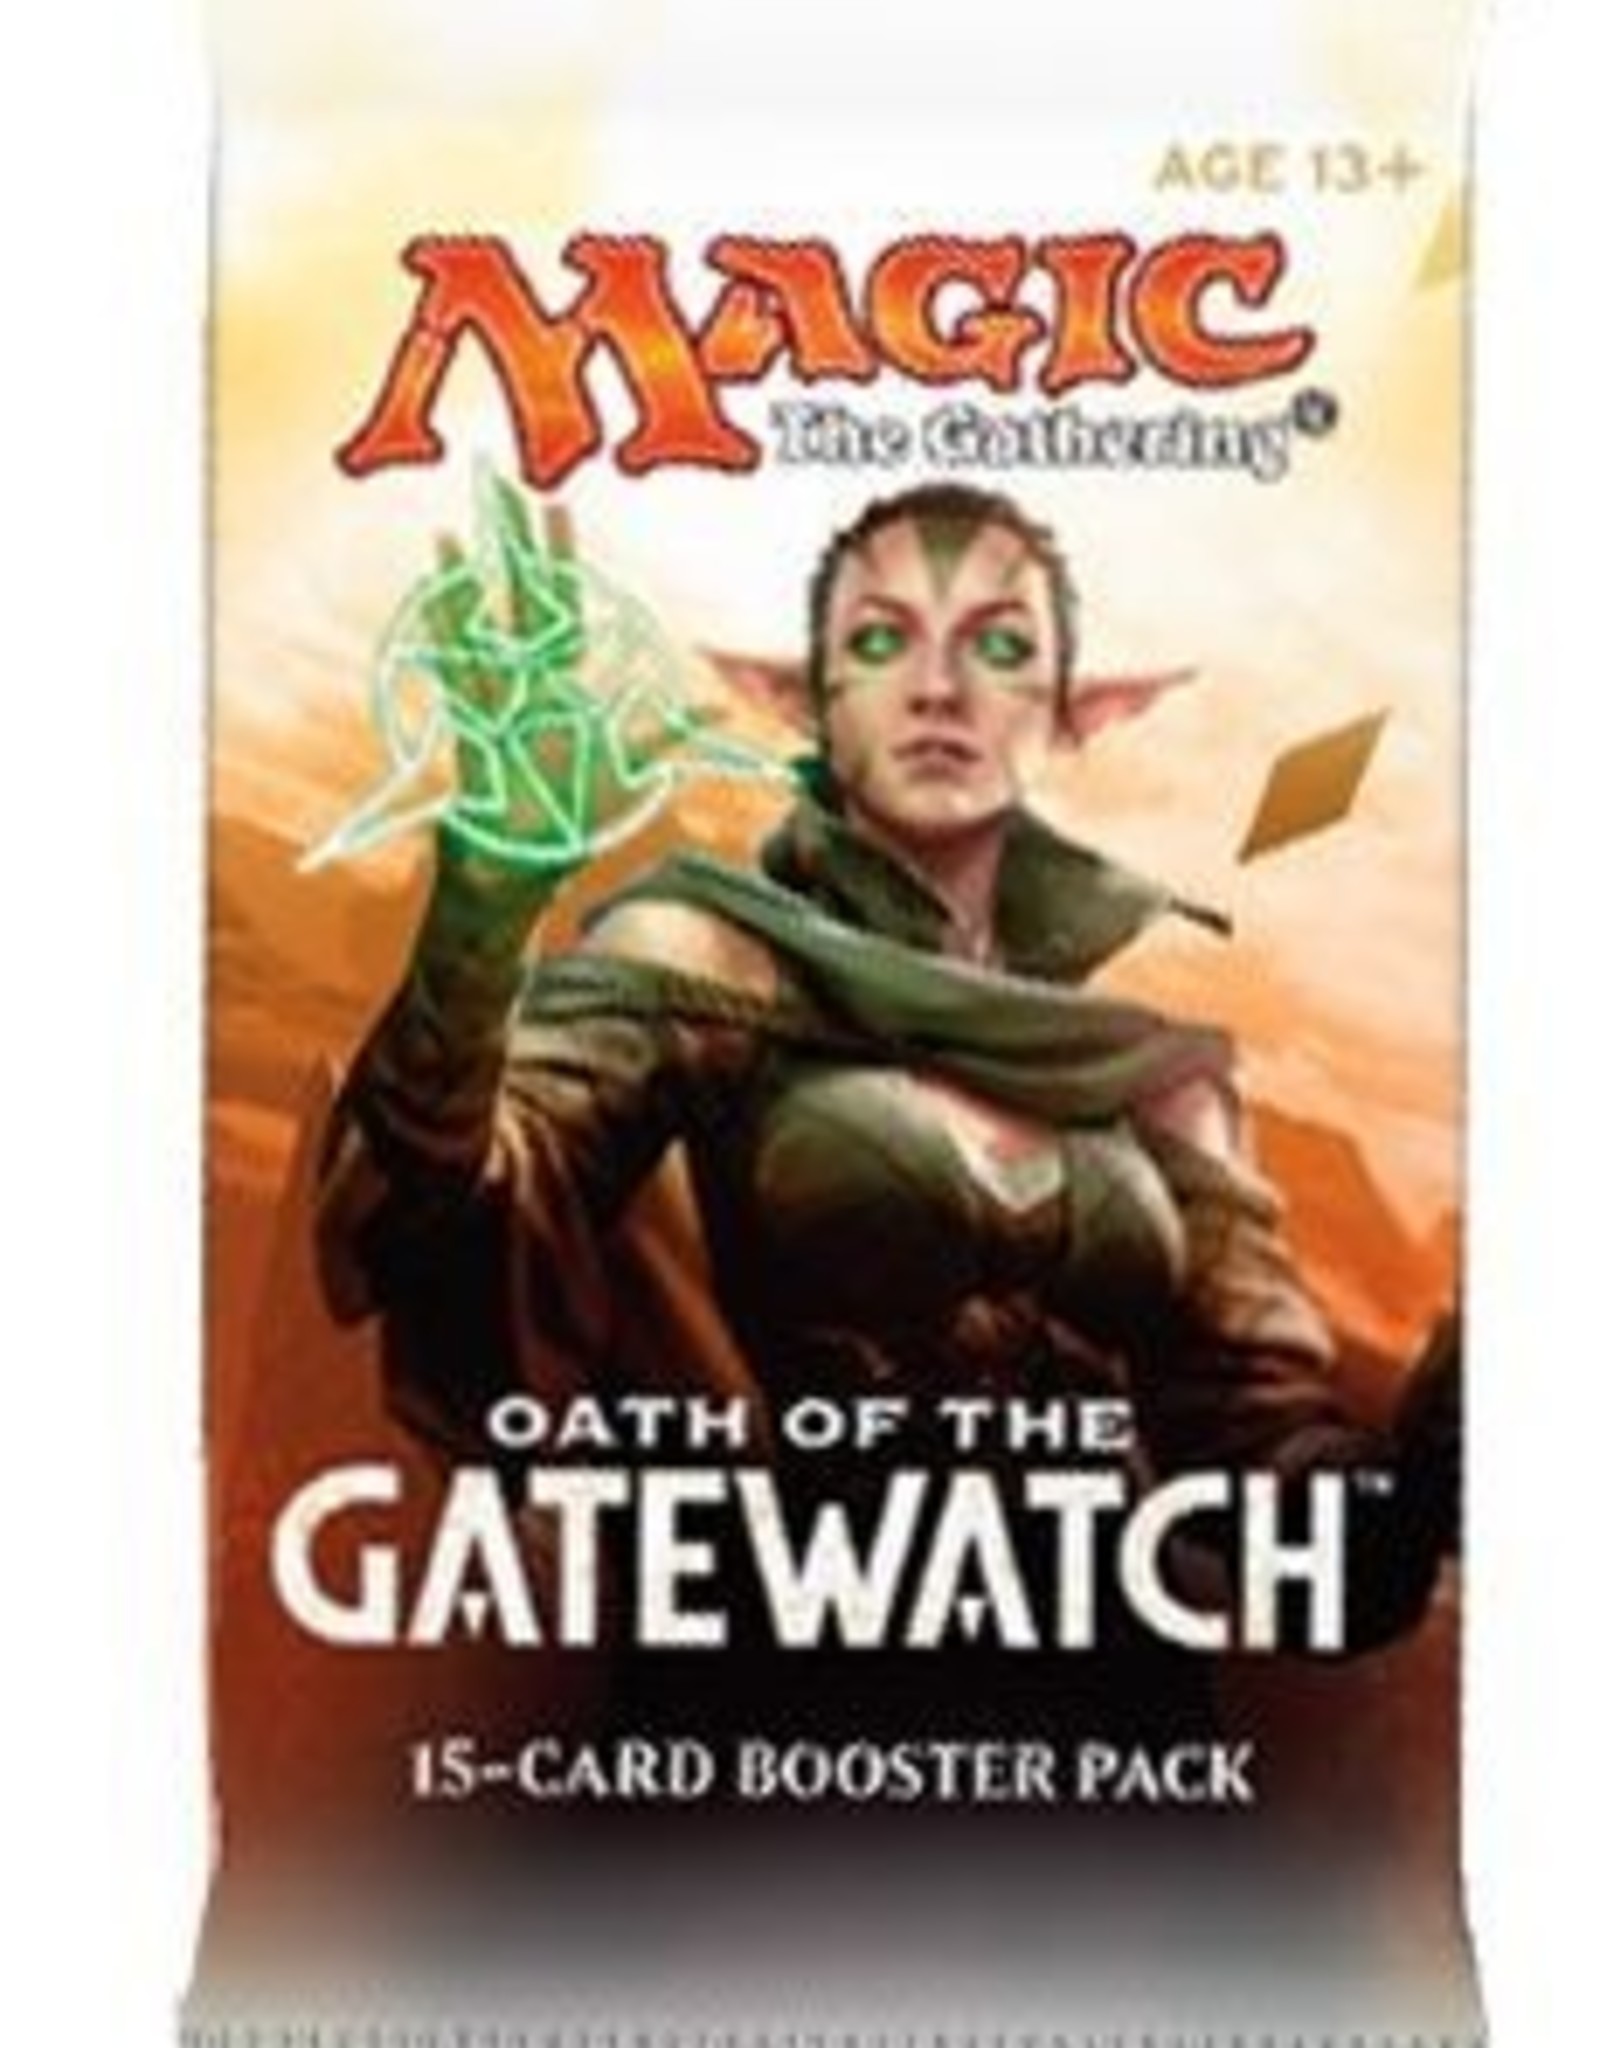 Wizards of the Coast MTG Oath of the Gatewatch Booster Pack